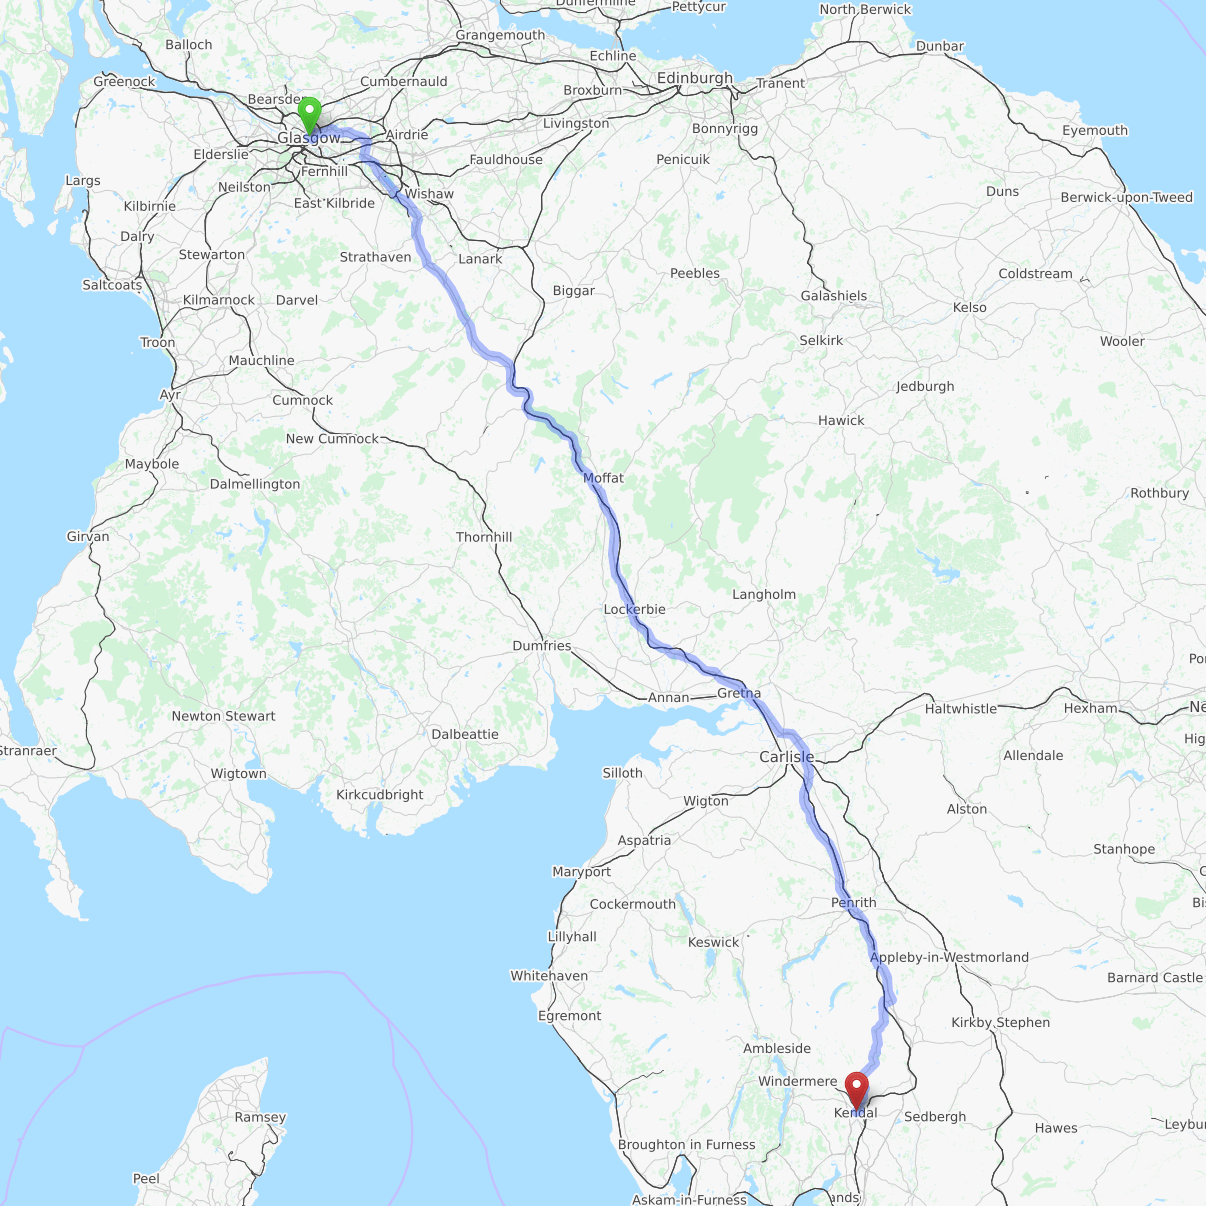 Getting to the Lake District from Scotland via Glasgow.